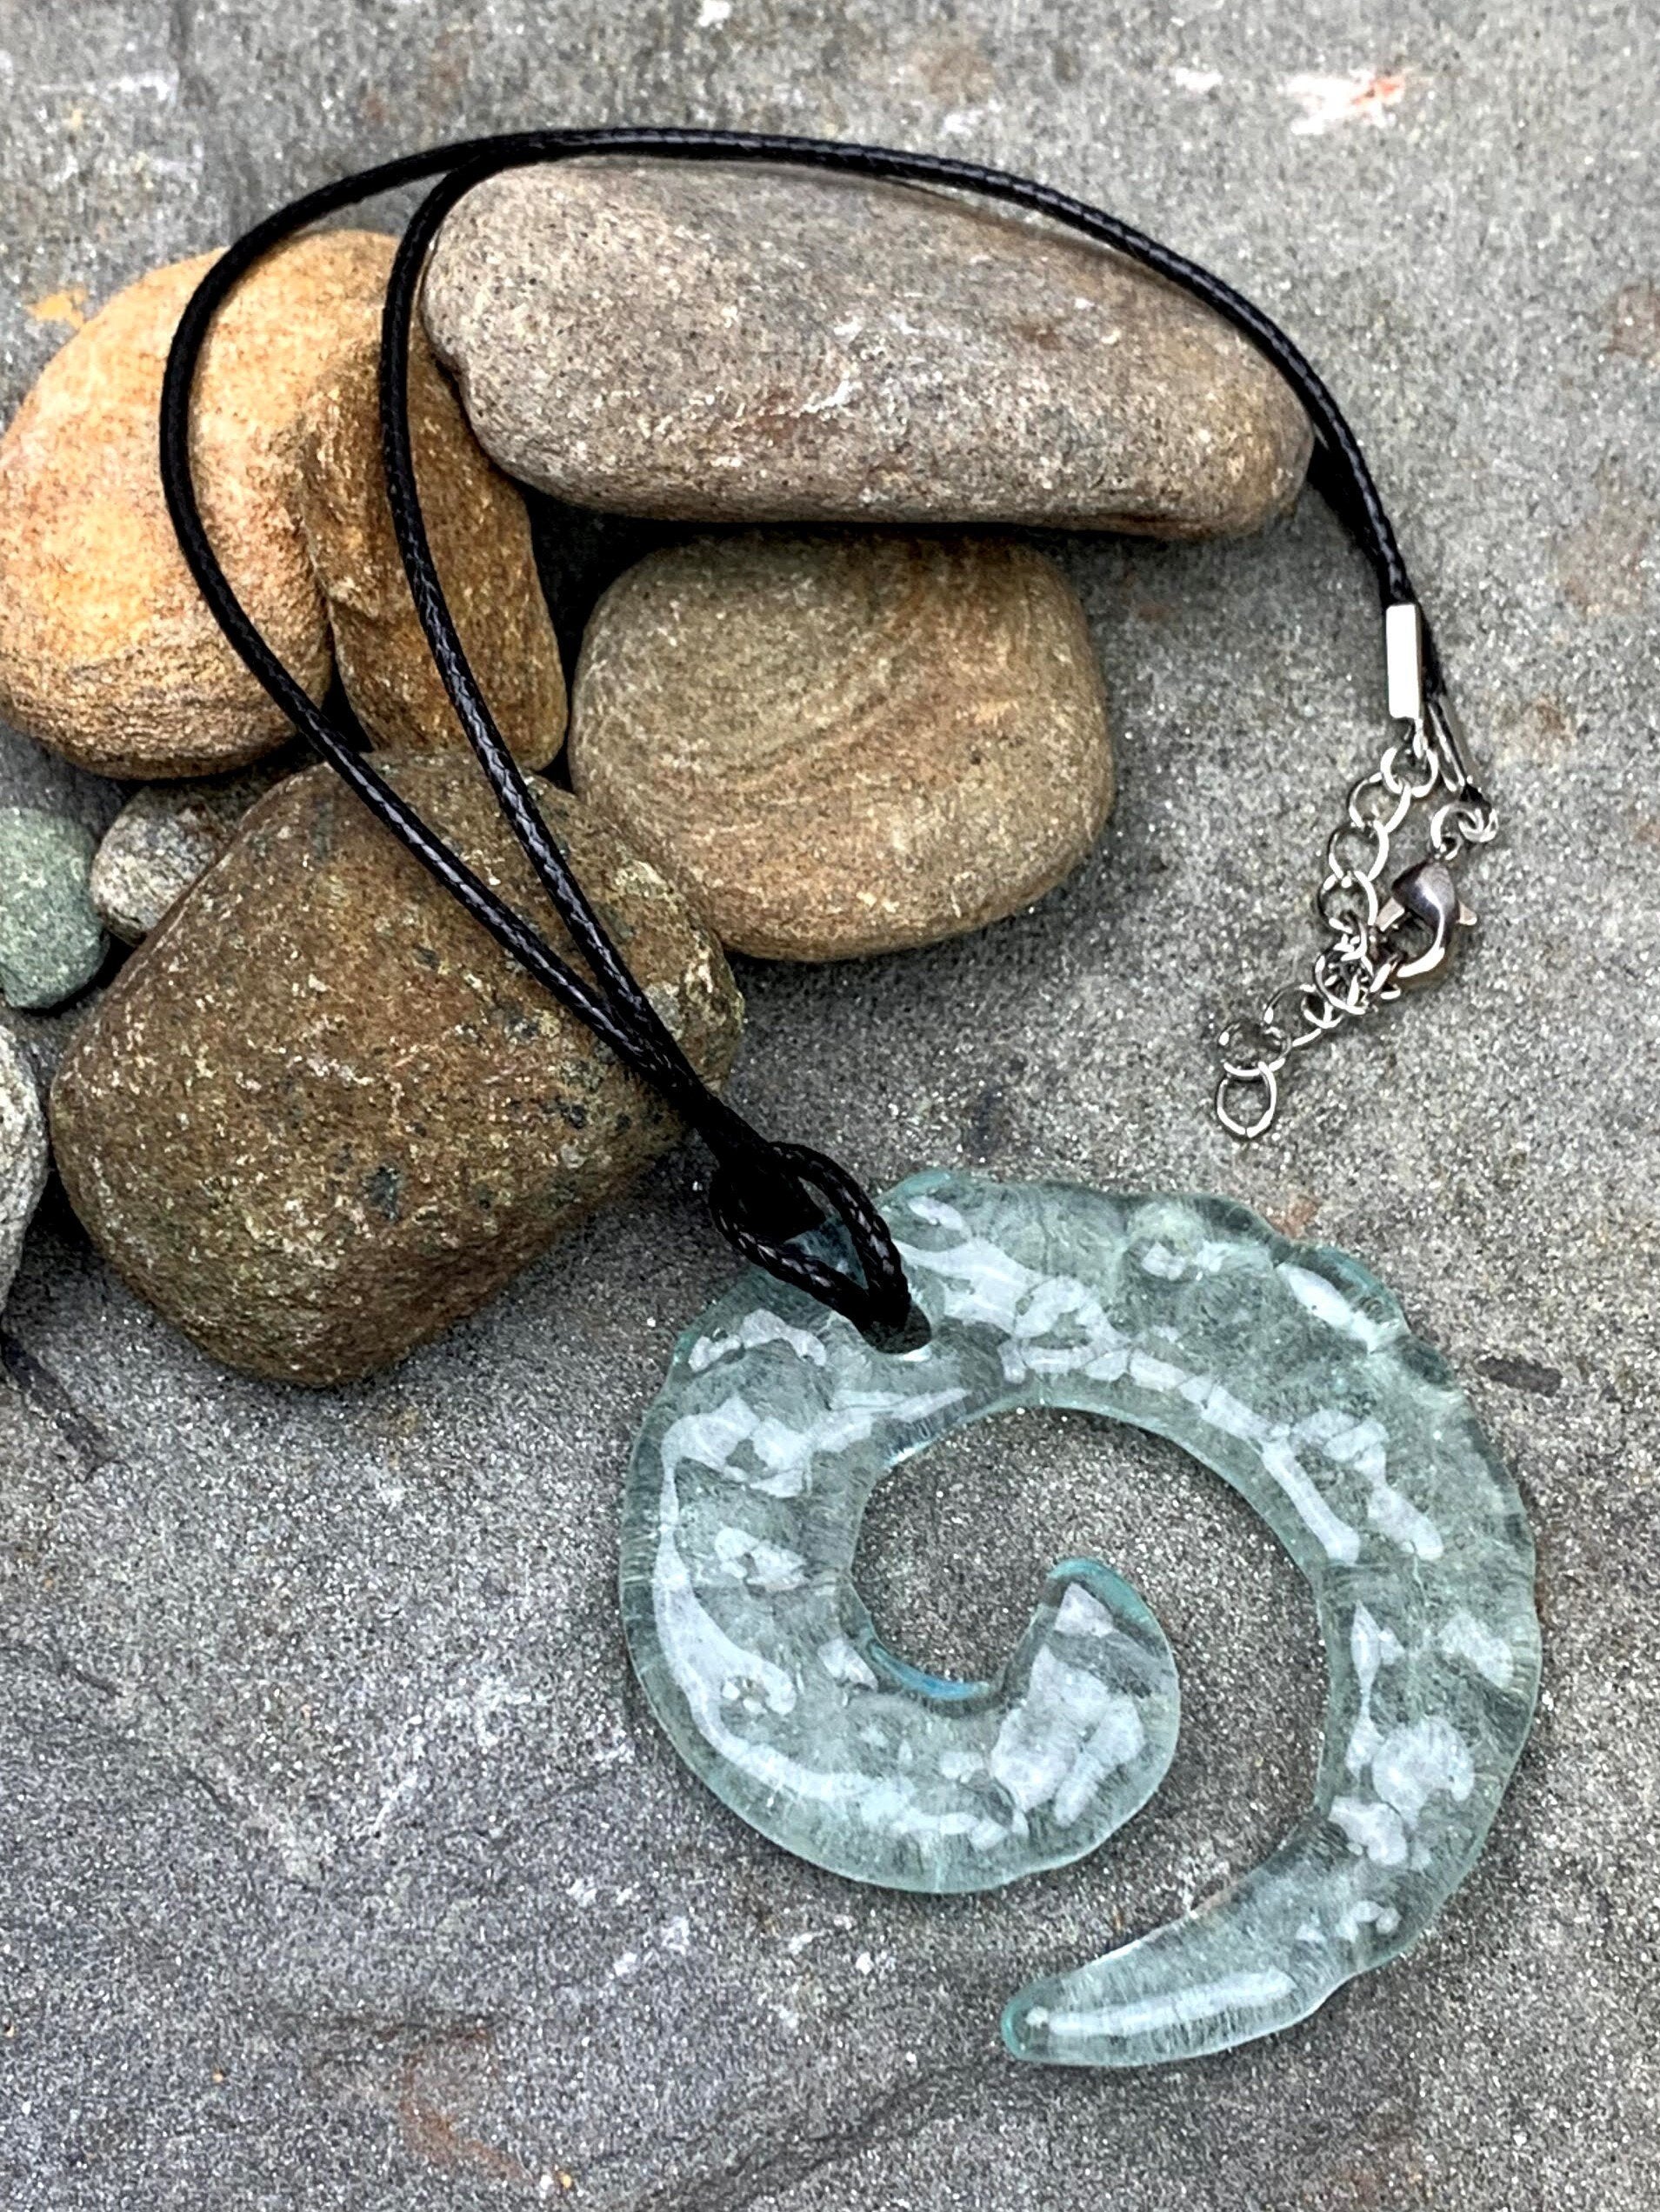 Upcycled Wine Bottle Jewelry, Aqua Spiral Statement Pendant Necklace, Recycled Glass, Gift for Wine Lover, Glass Bottle Art